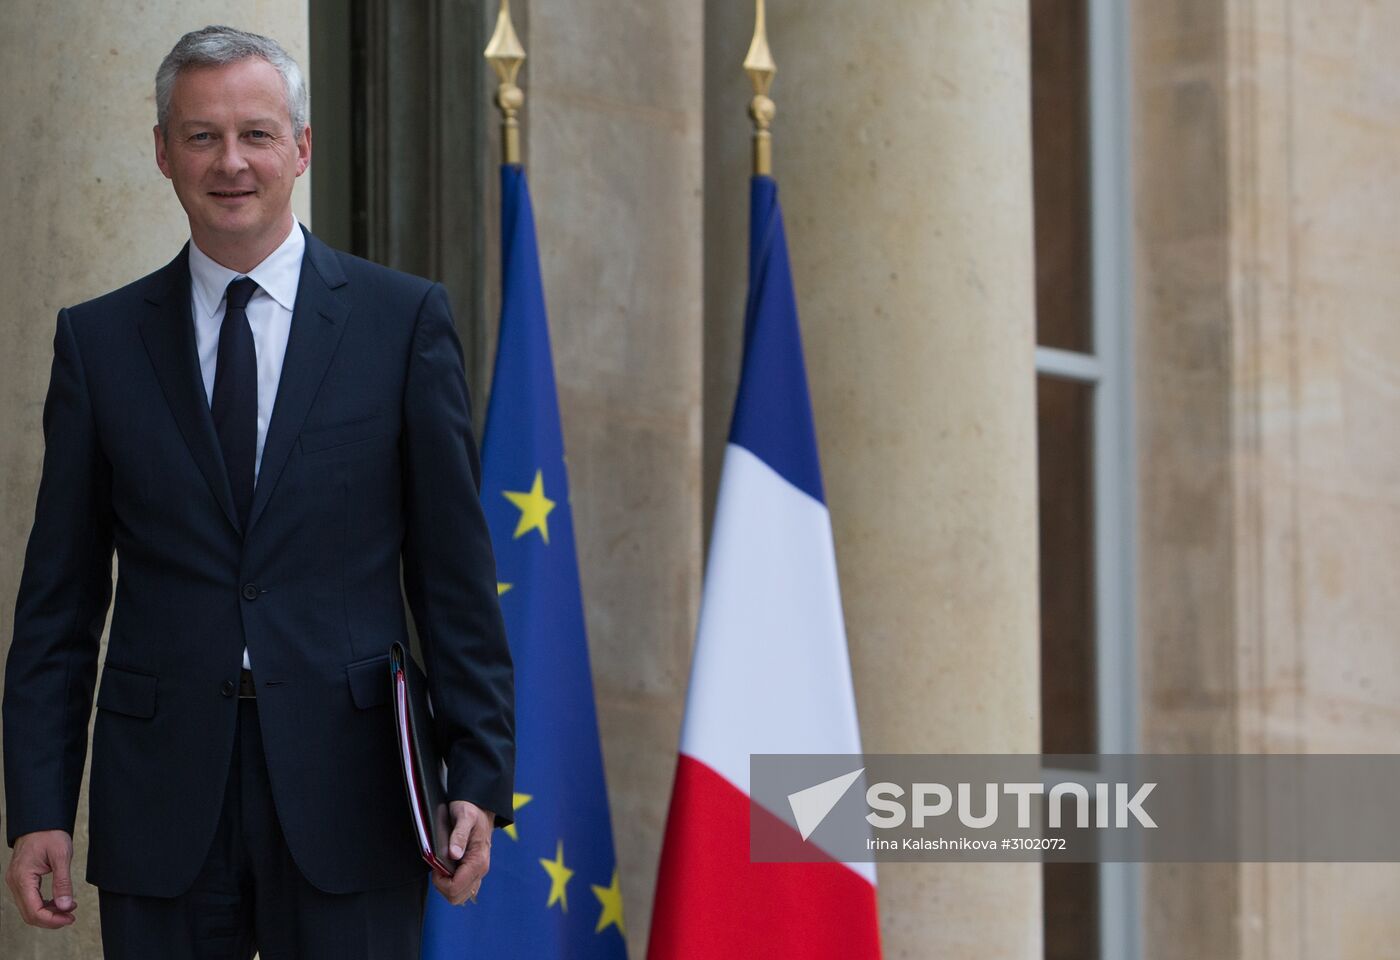 First meeting of new French Cabinet